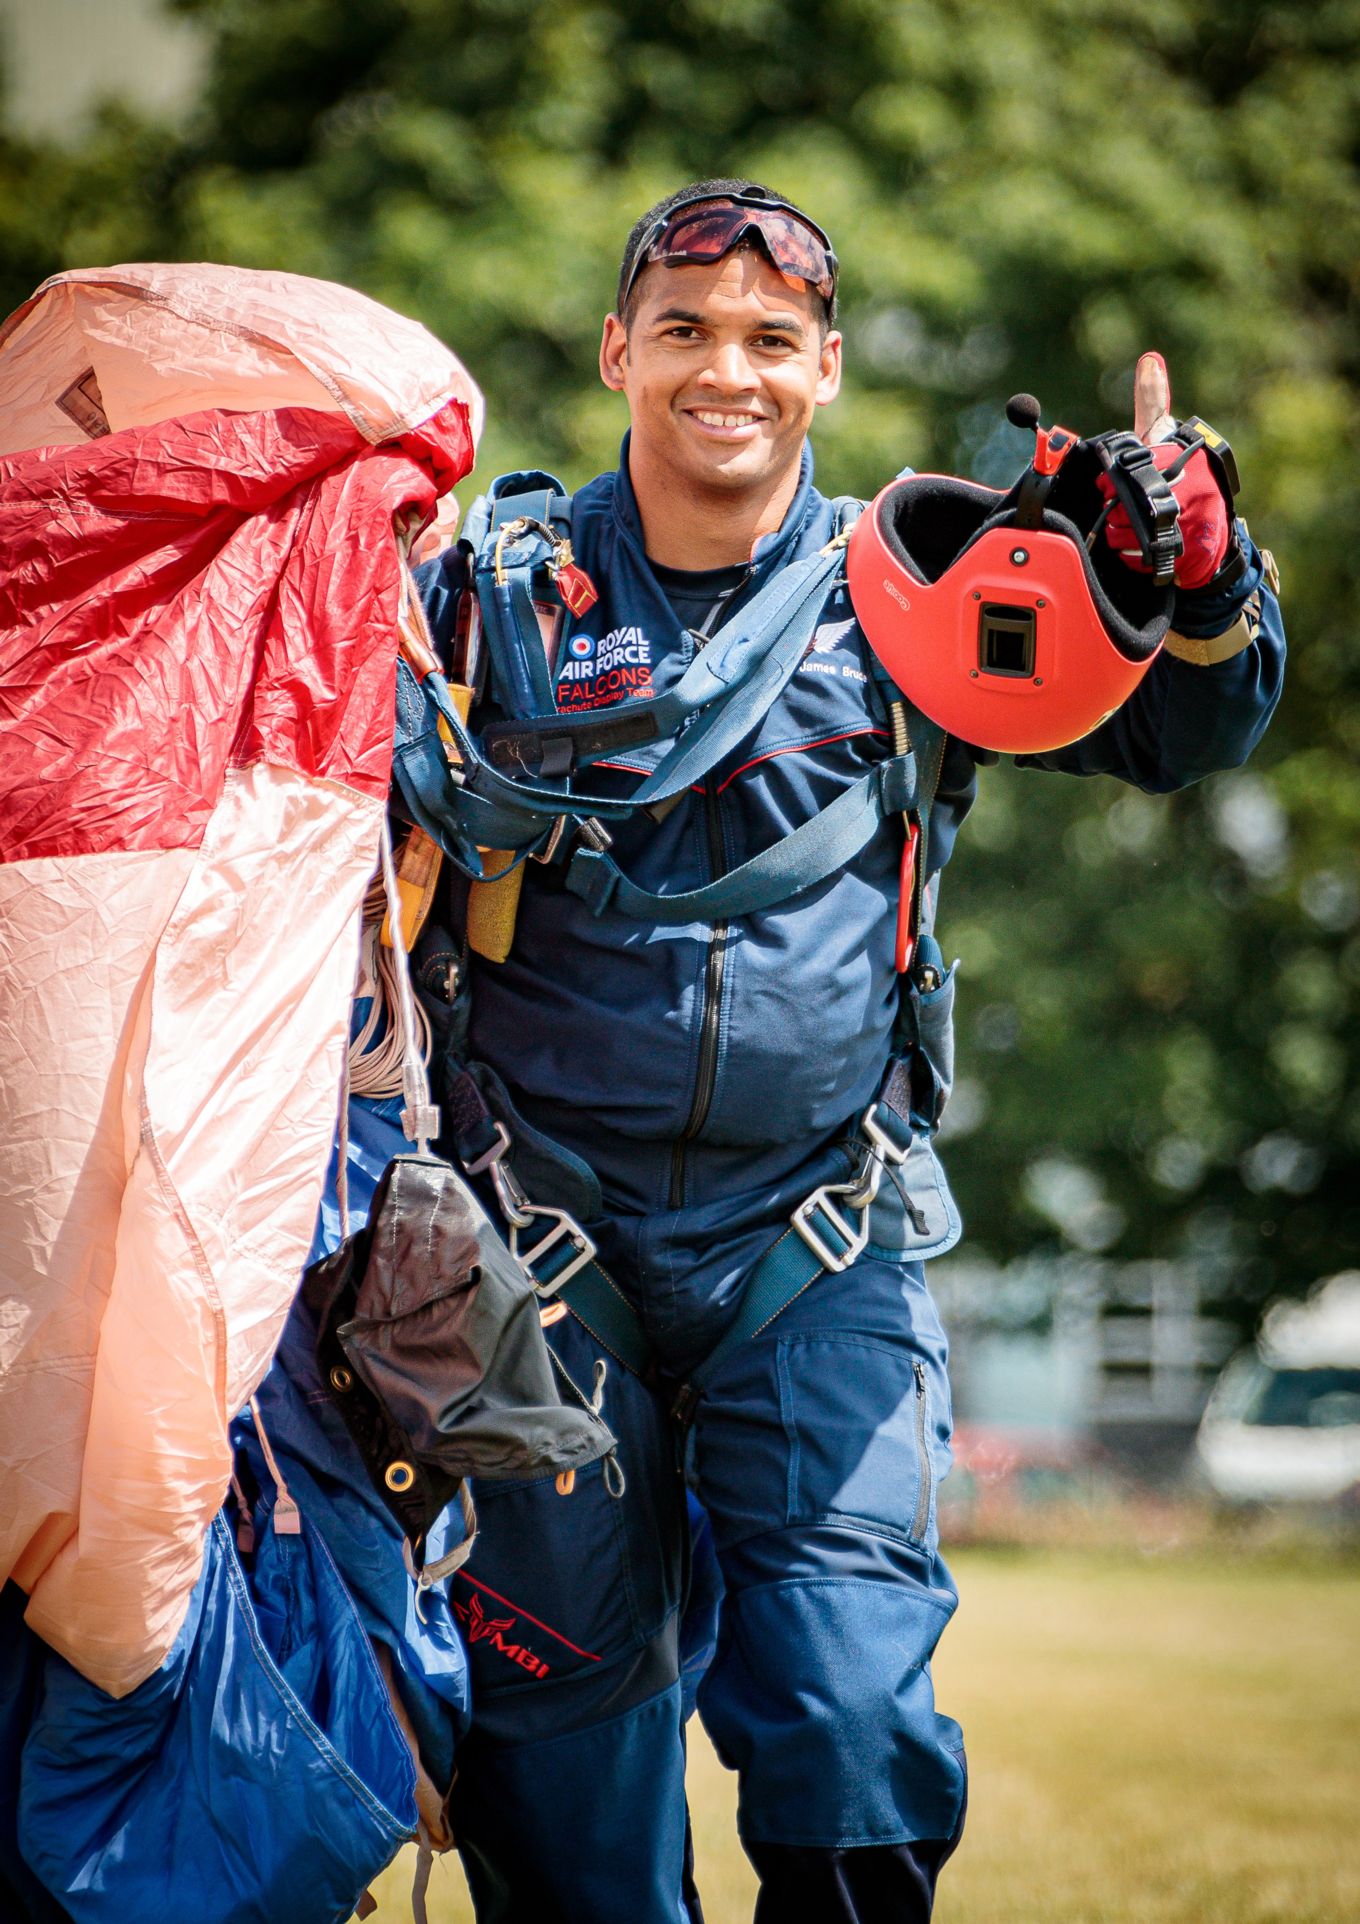 – Flight Sergeant Bruce, Team Coach pictured on the Drop Zone after a successful jump